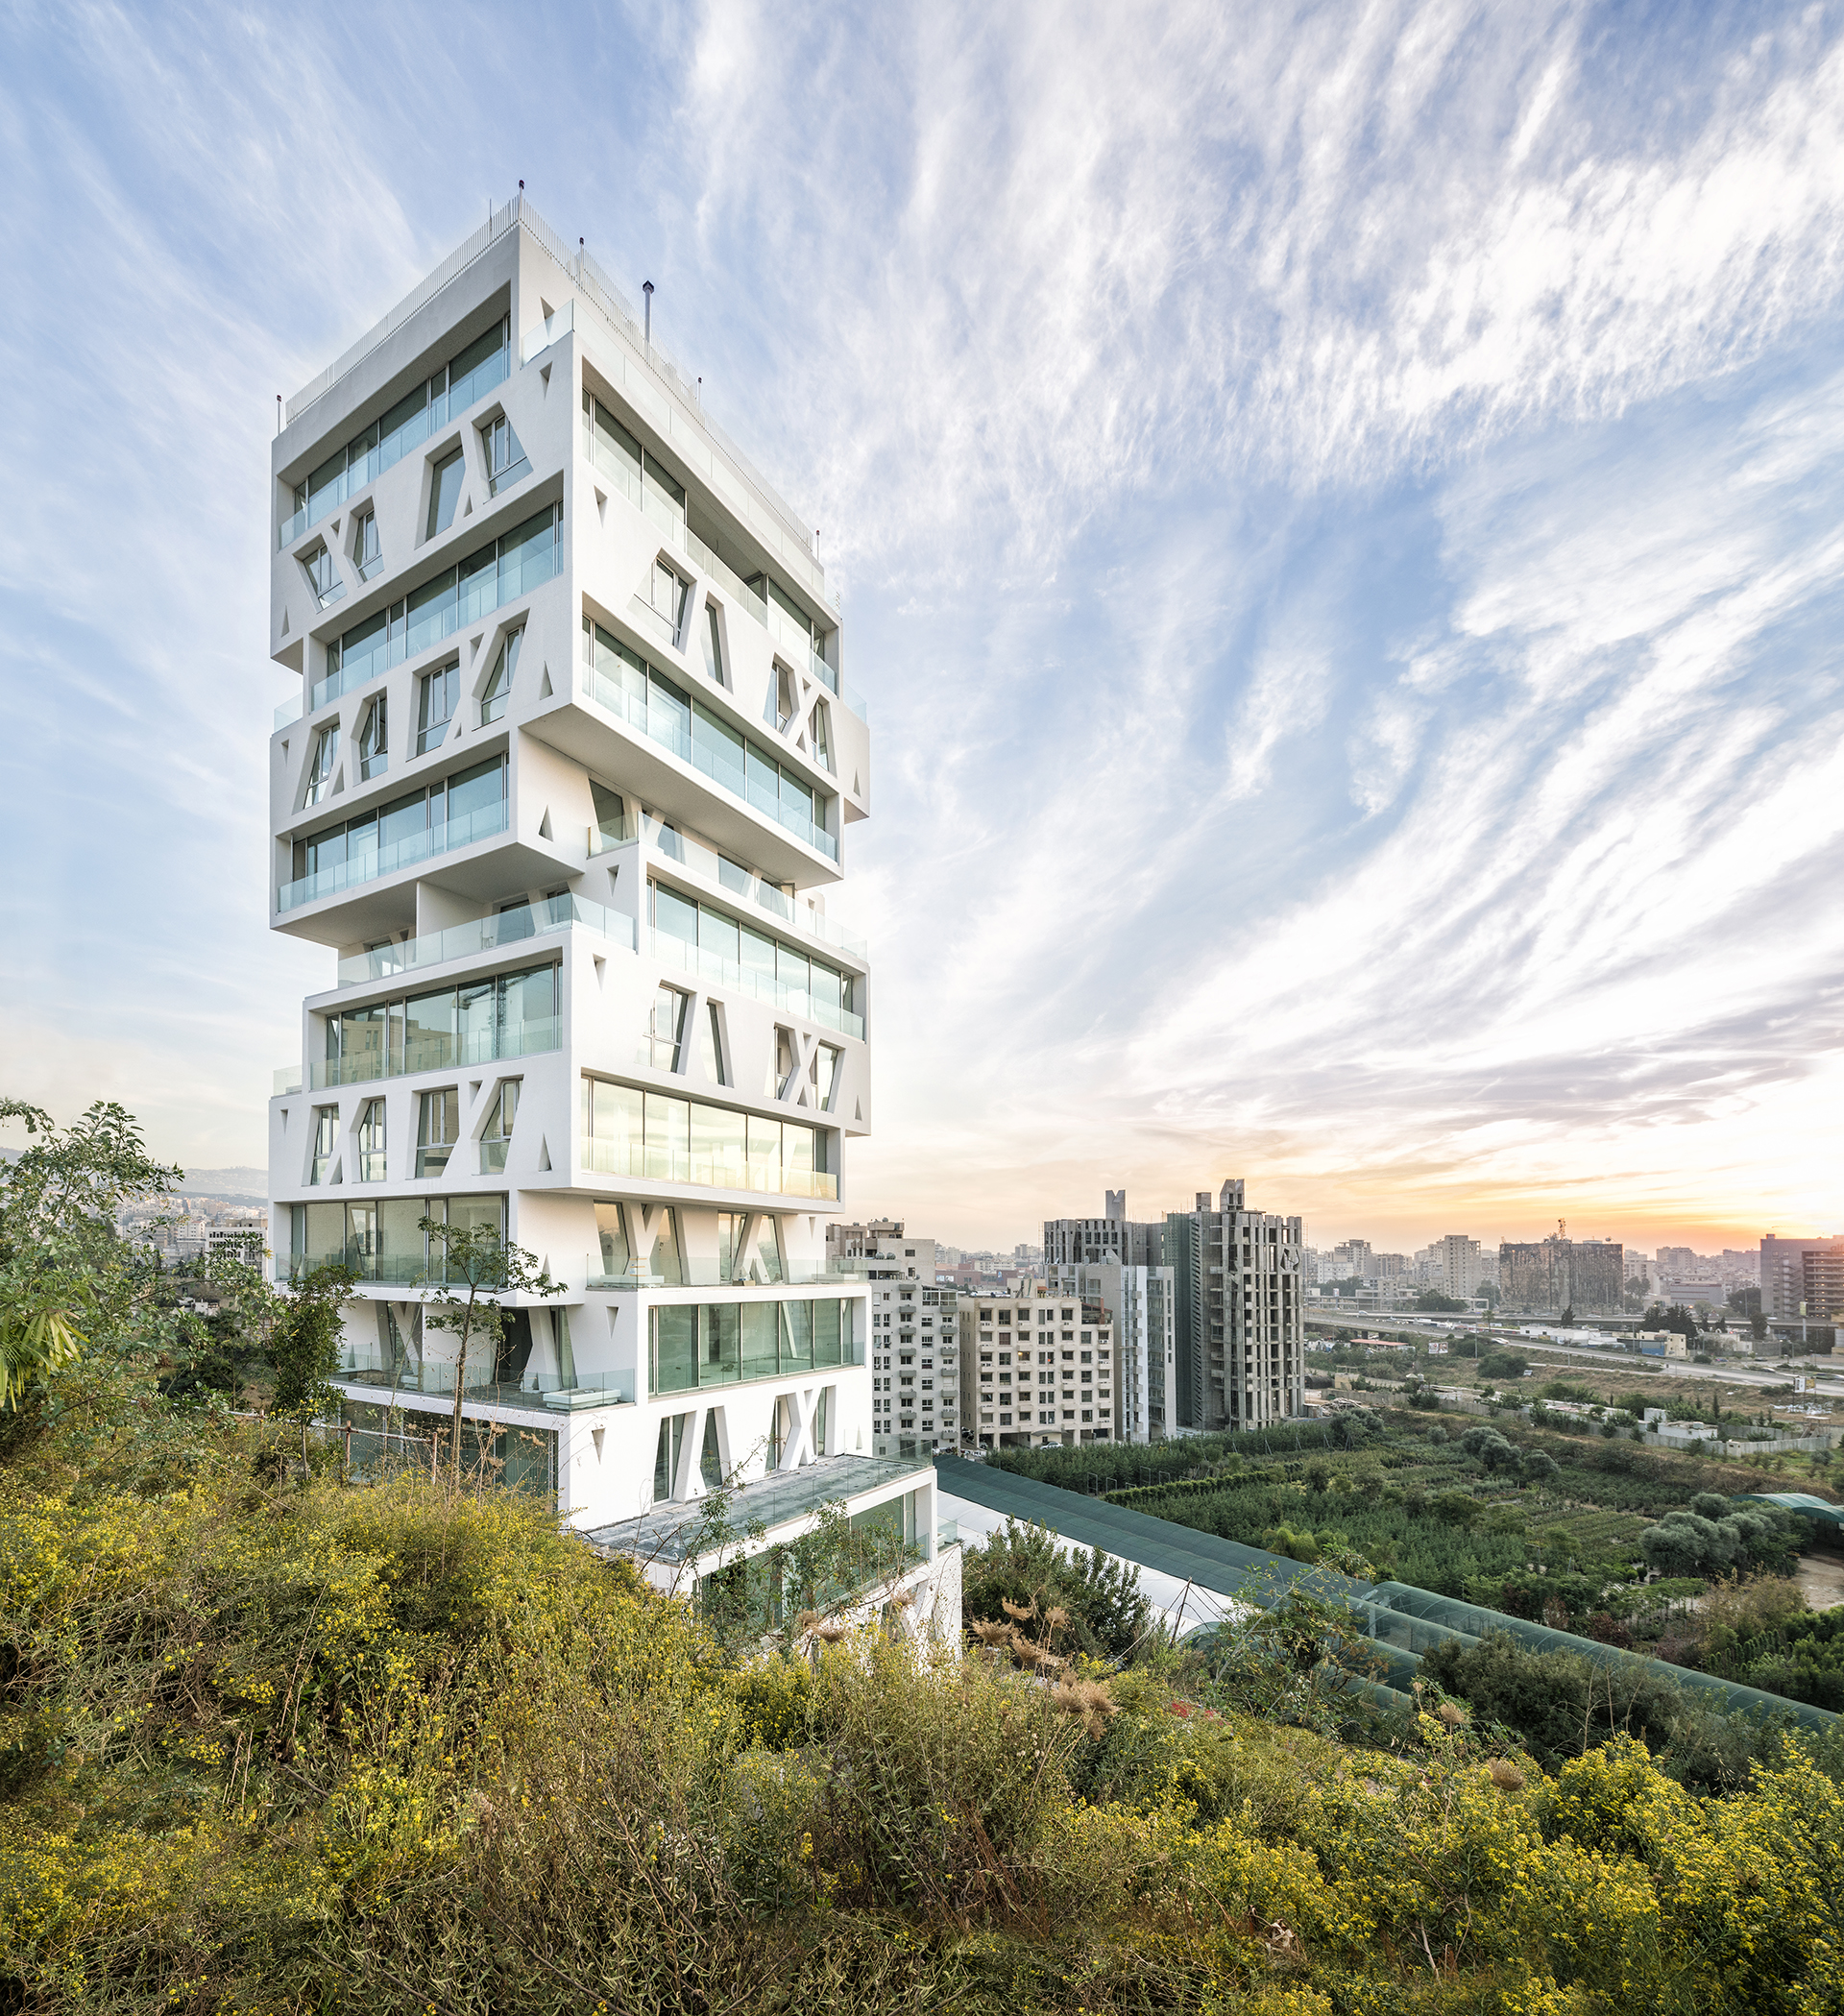 <p>Back facade. The tower is constructed of perforated steel girders, and each apartment is organised around a central core - kitchen, bathrooms, wardrobes, cupboards, and elevator access - and the spaces around them are fluid and permit 360° views over Beirut.&nbsp;</p>